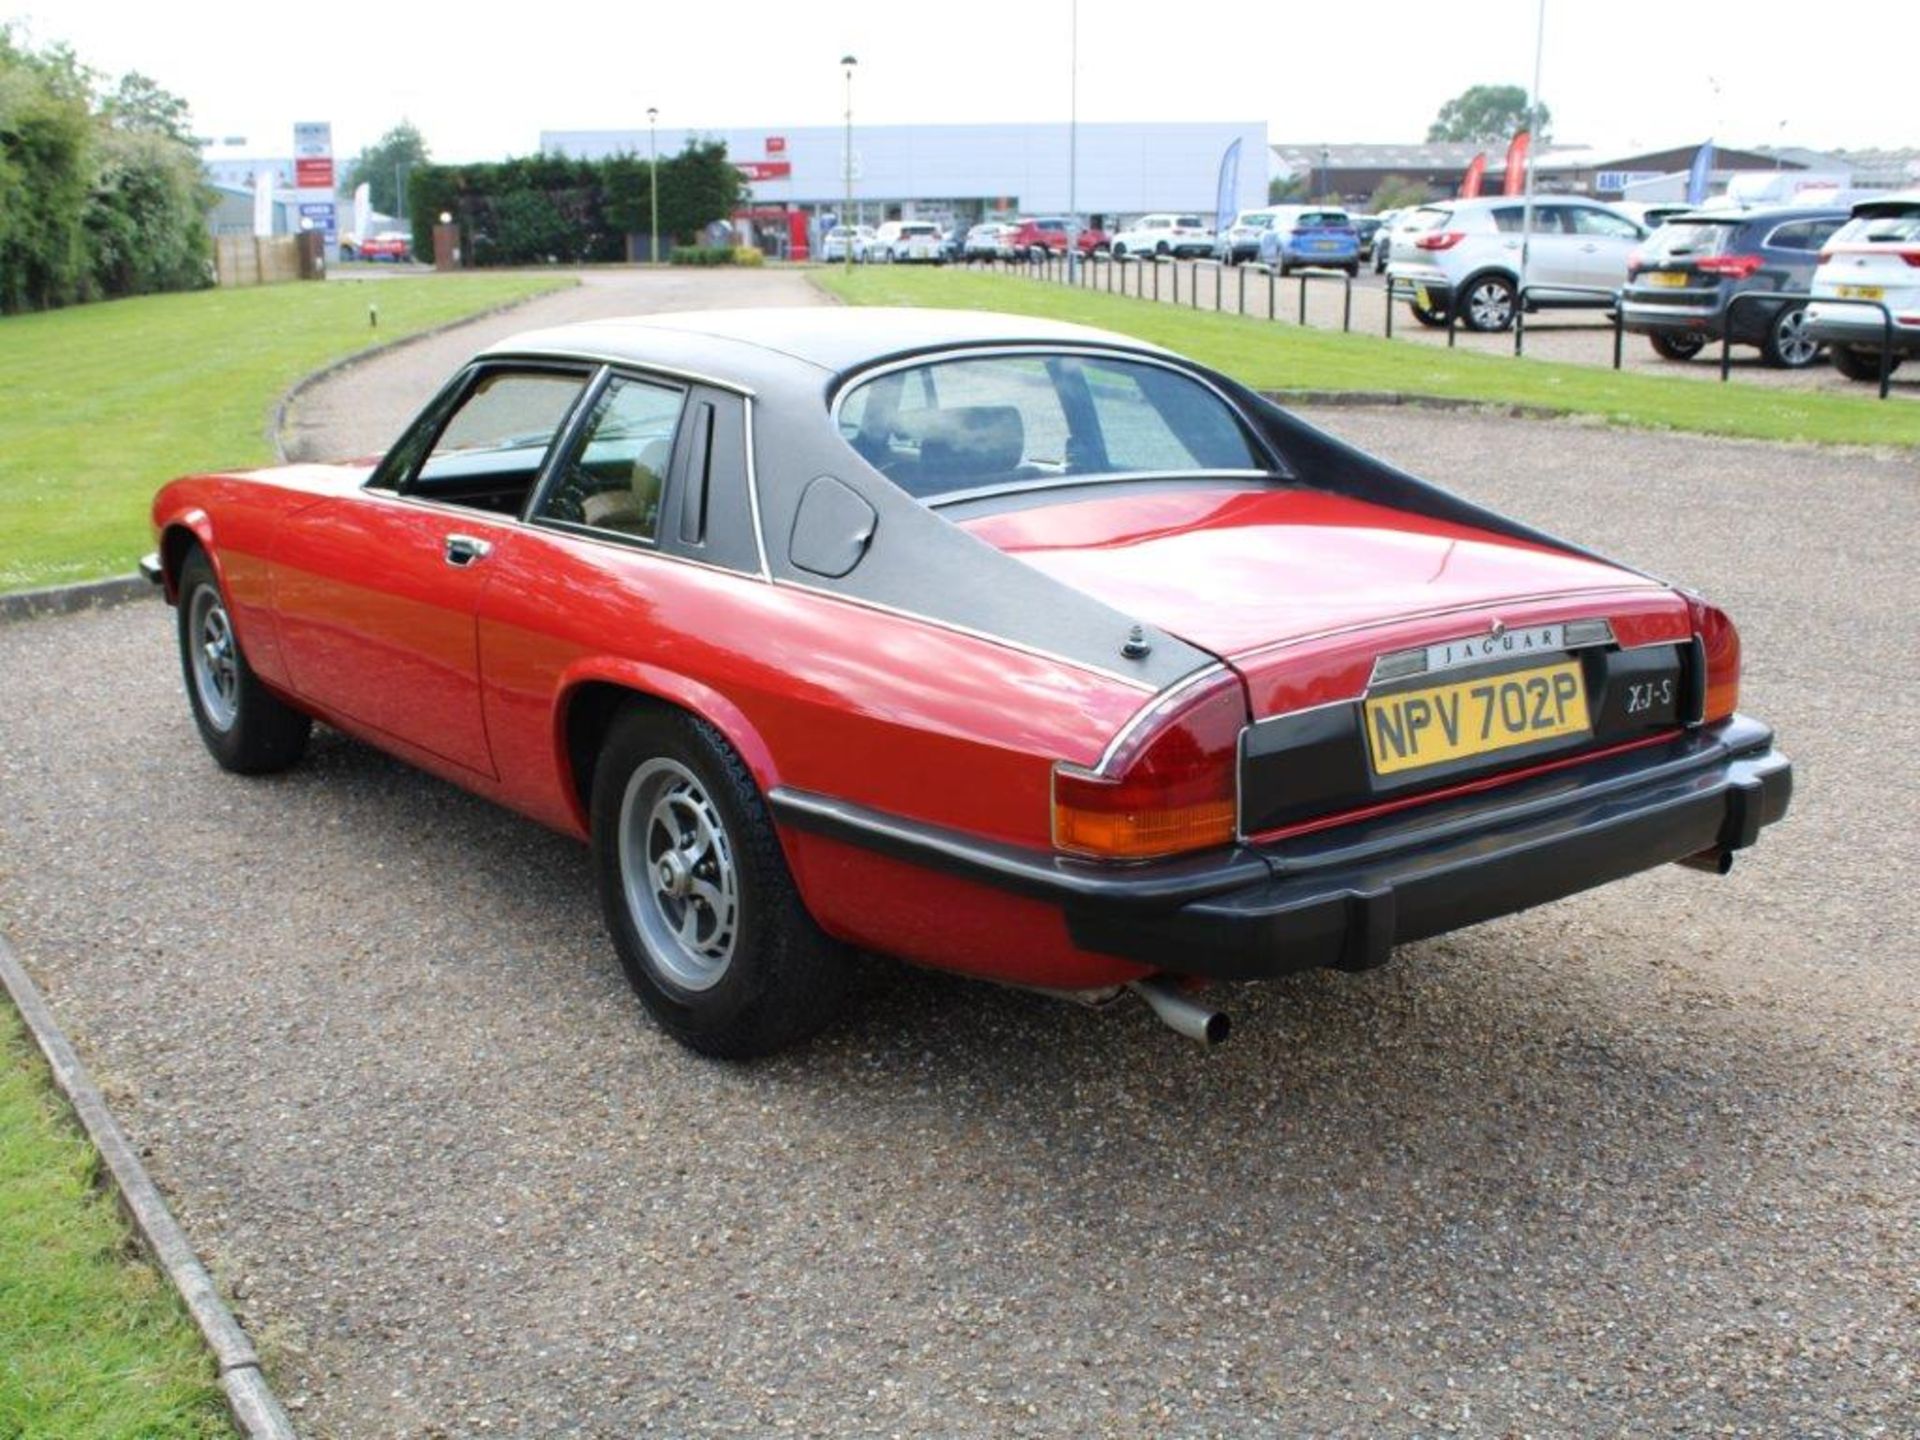 1976 Jaguar XJ-S 5.3 V12 Coupe Auto 29,030 miles from new - Image 4 of 28